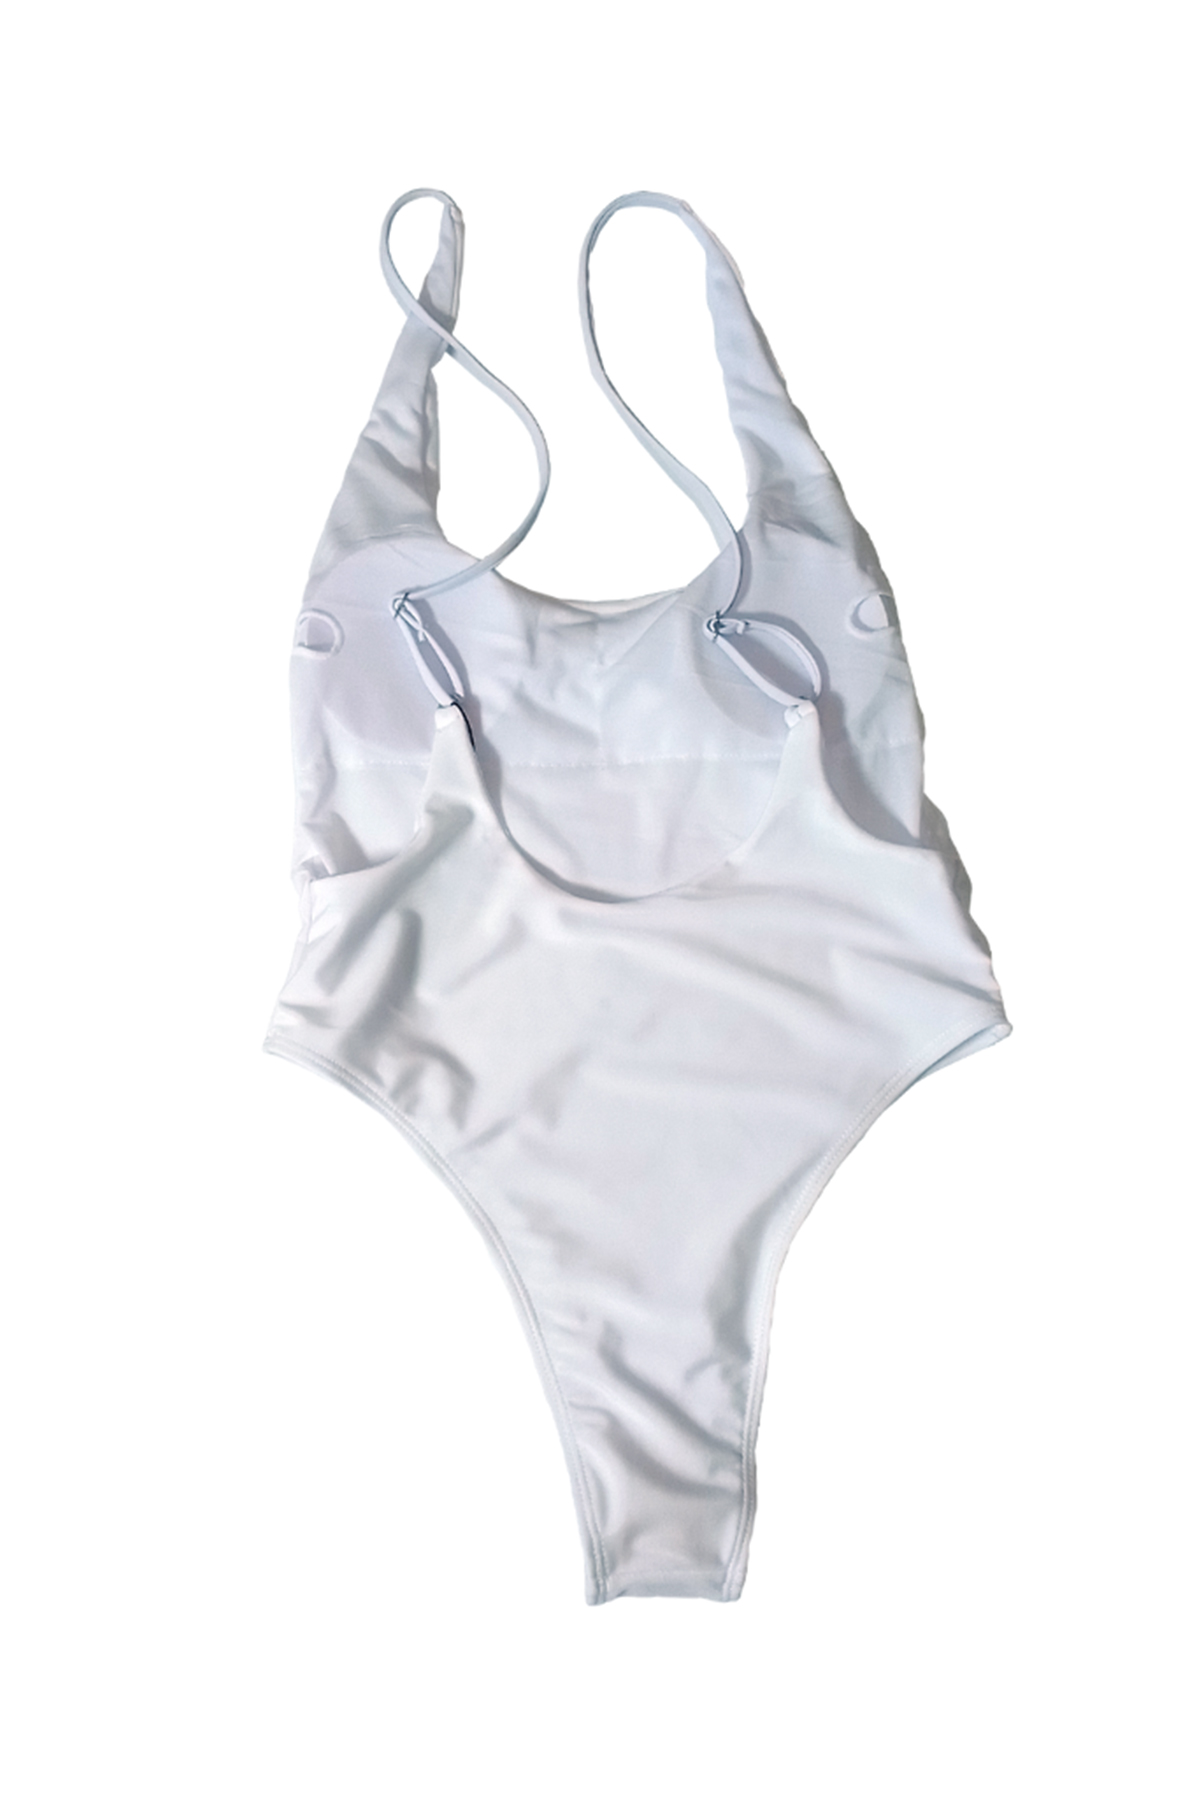 Time-Out-X-One-Piece-Bikini-Swimsuit—White—Back